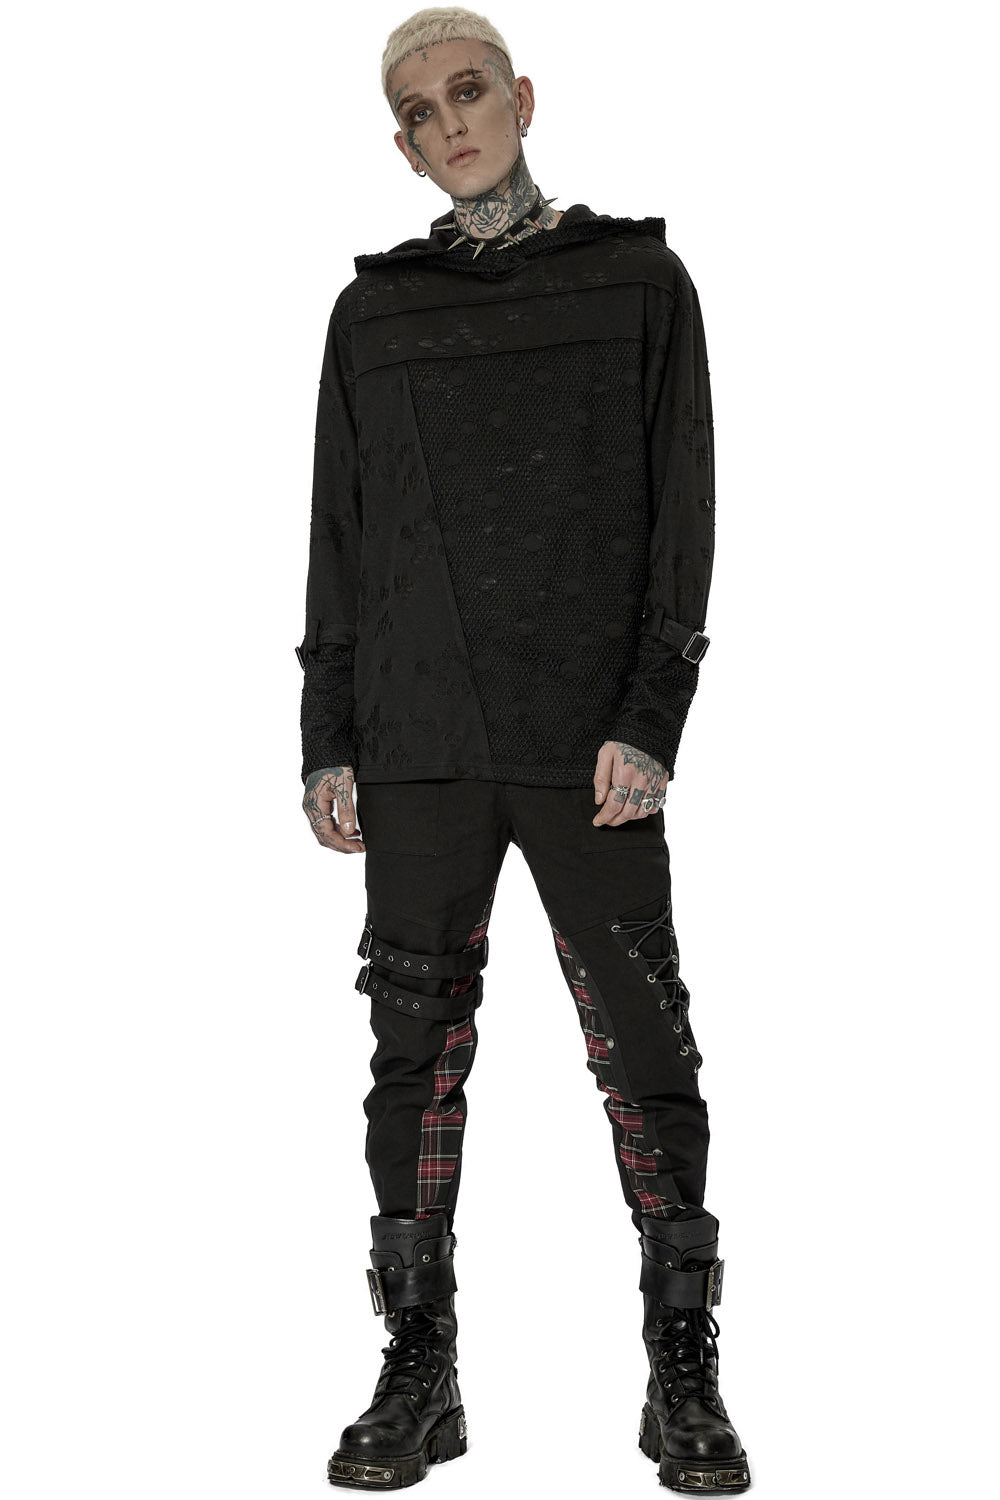 Haunter Distressed Hooded Top